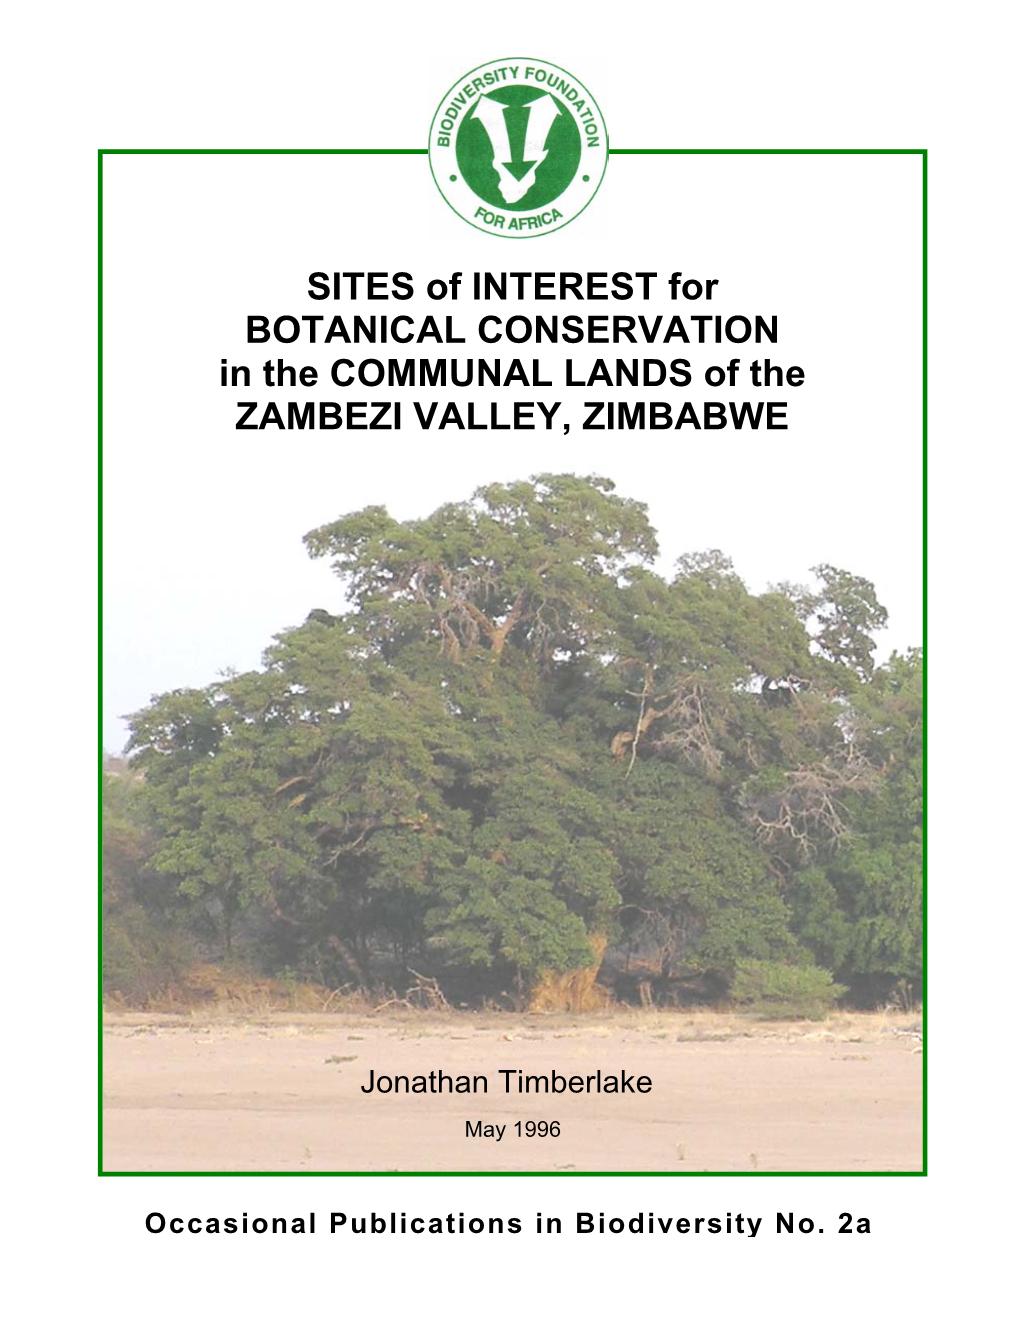 SITES of INTEREST for BOTANICAL CONSERVATION in the COMMUNAL LANDS of the ZAMBEZI VALLEY, ZIMBABWE